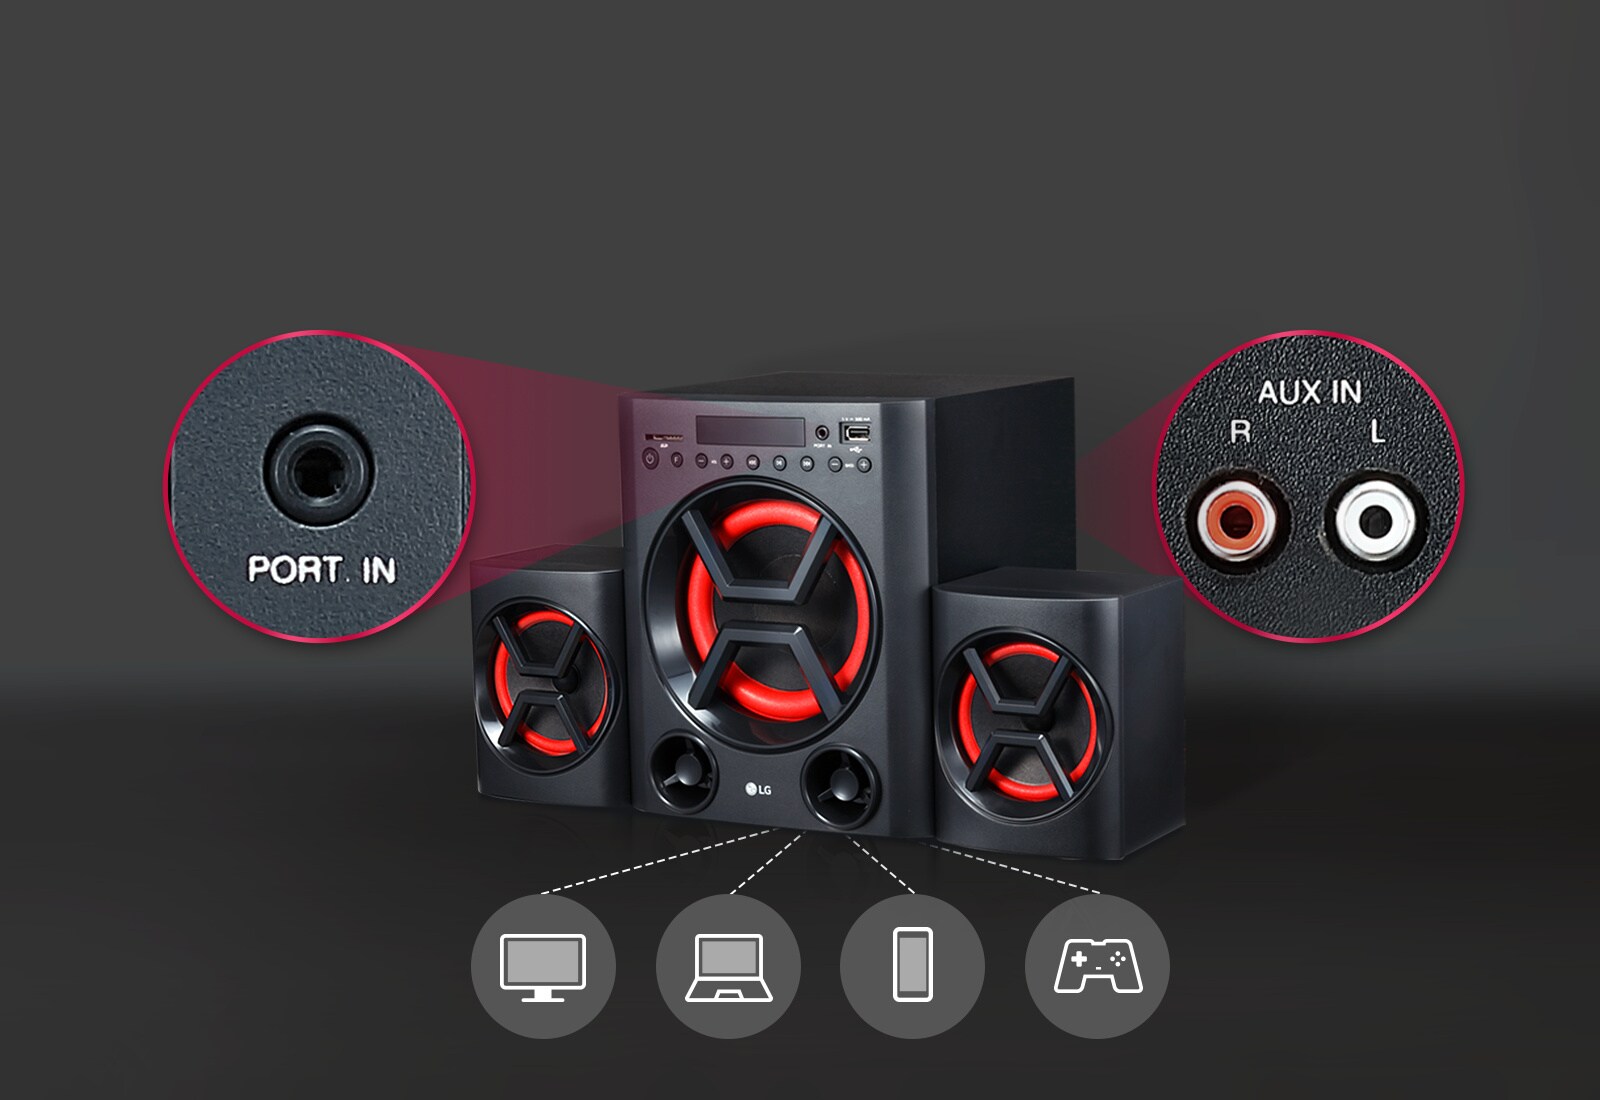 LG LK72: XBOOM PA Entertainment System at CES 2019